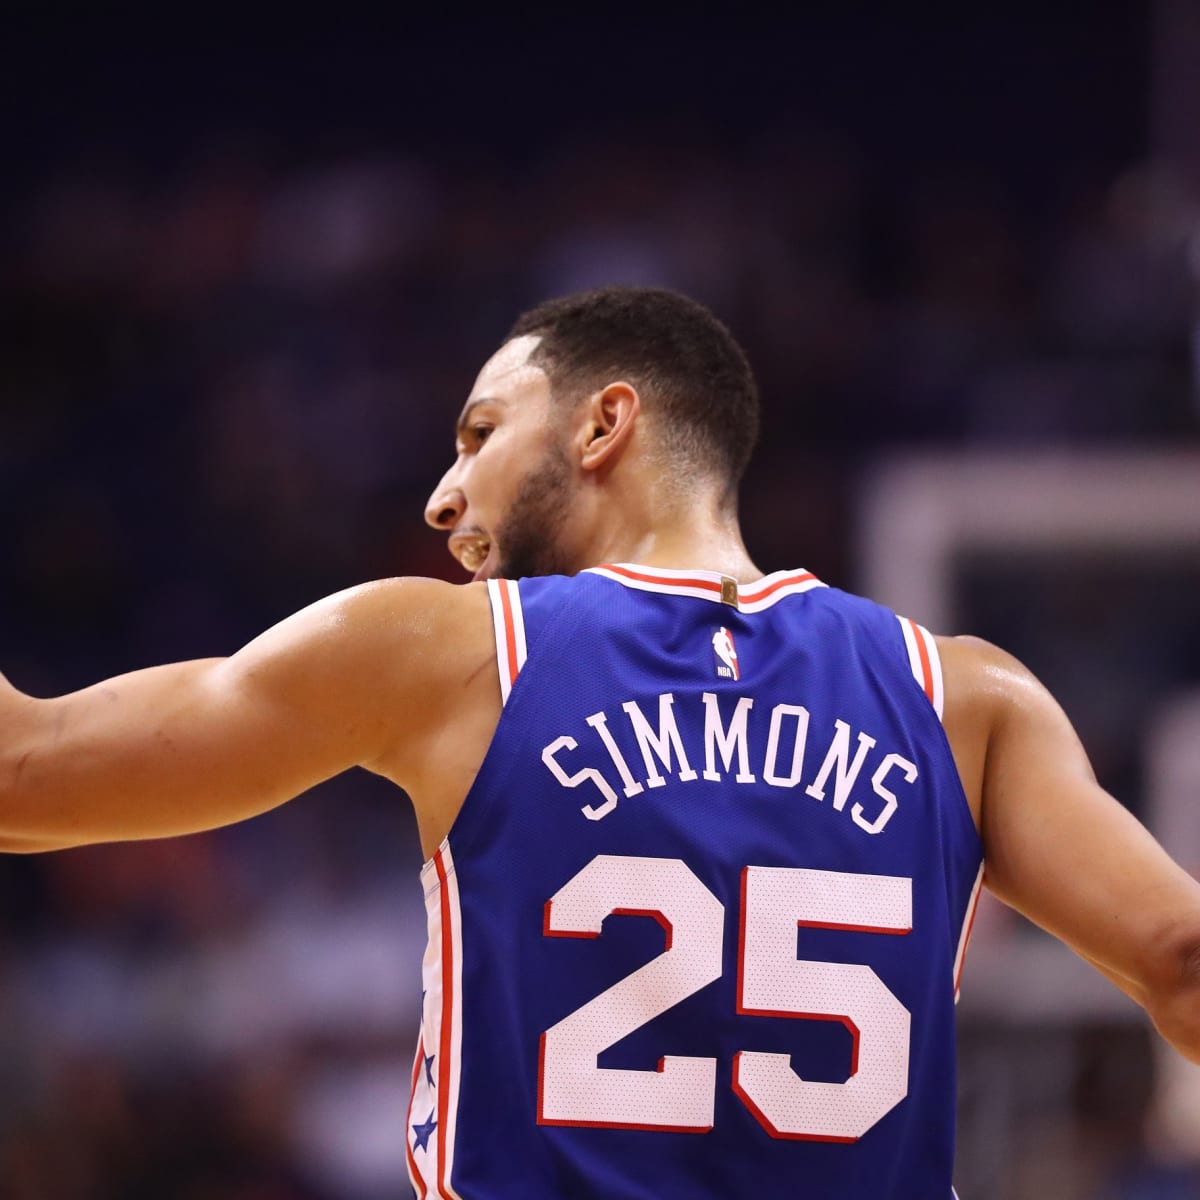 Ben Simmons shines in more than just the stats, Basketball